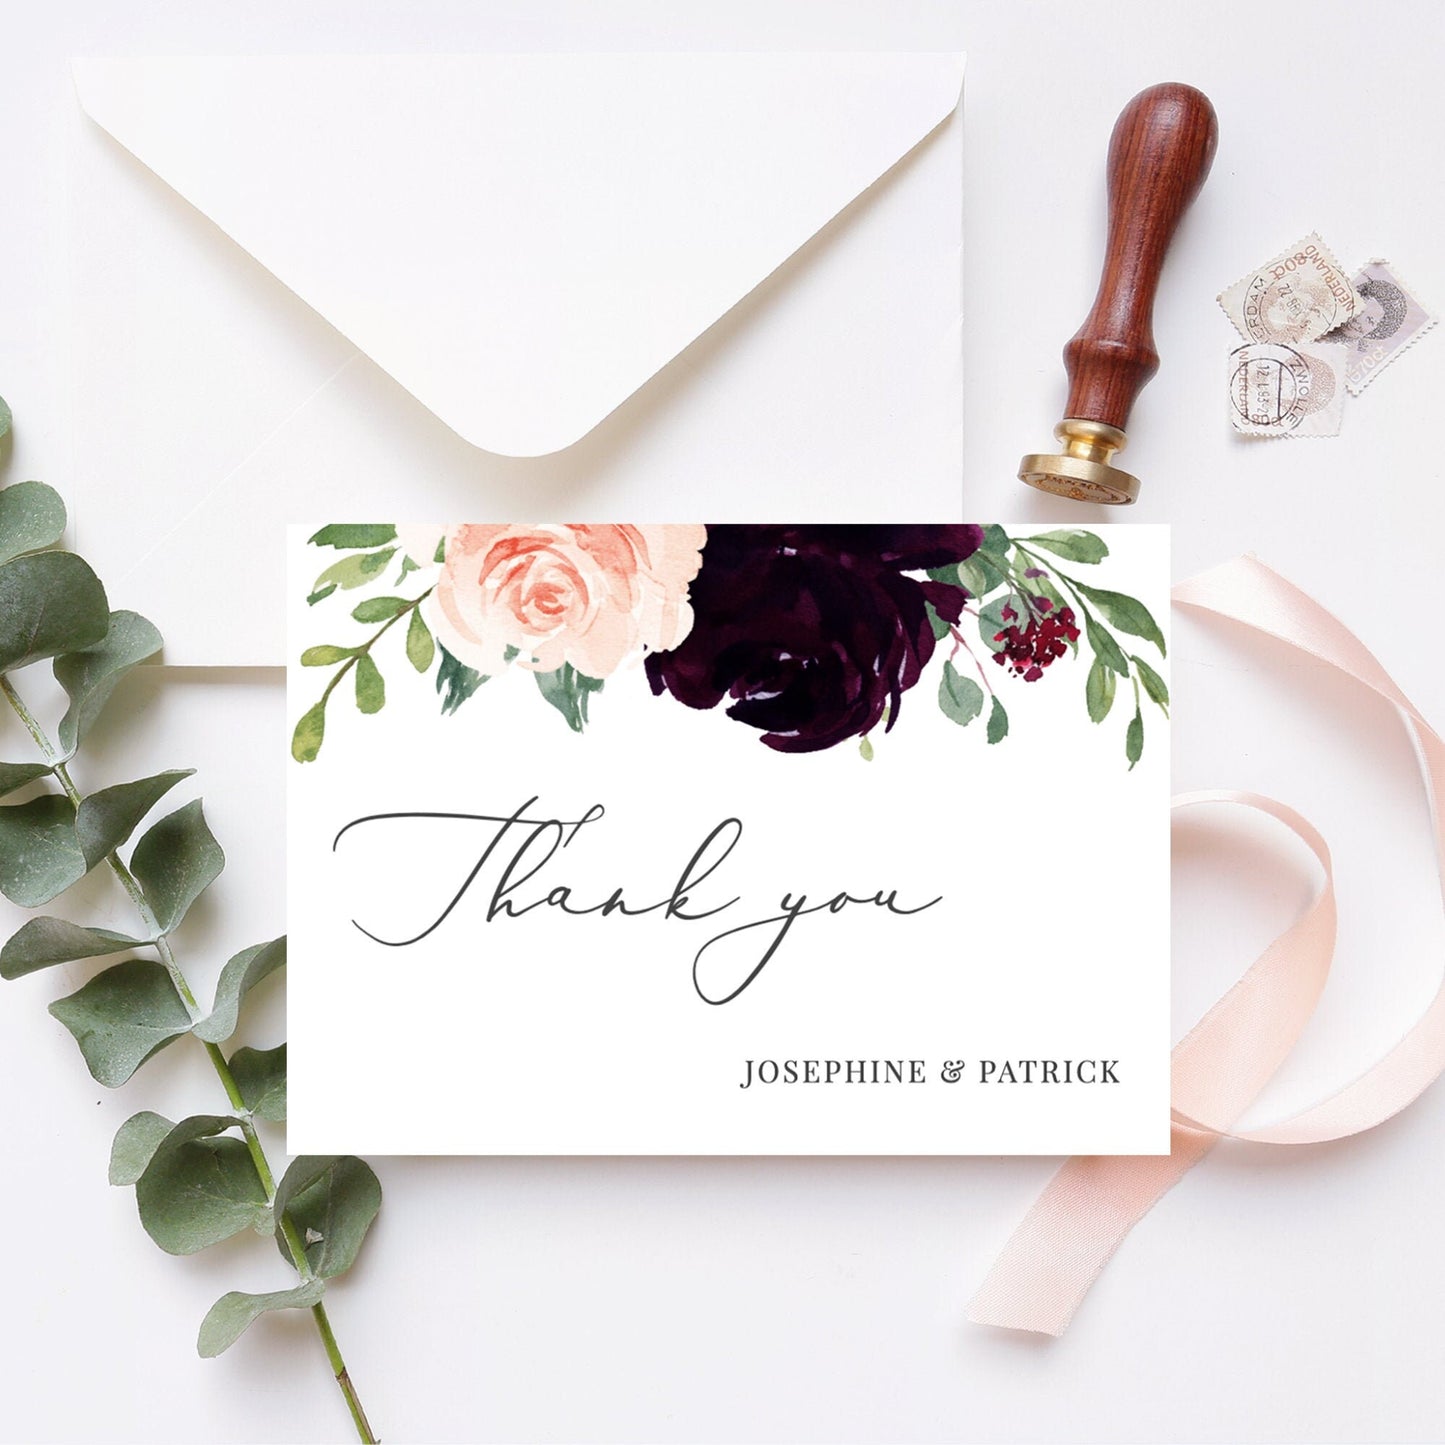 Editable Burgundy Floral Wedding Thank You Cards Cards Personalized Thank You Cards Template